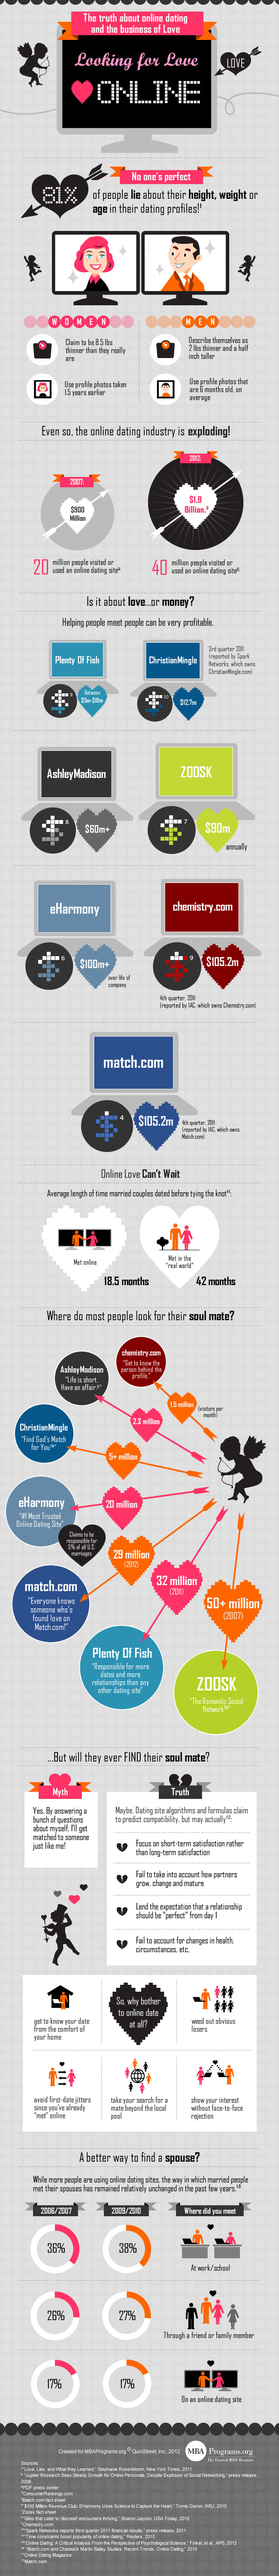 Looking-For-Love-Online-Infographic